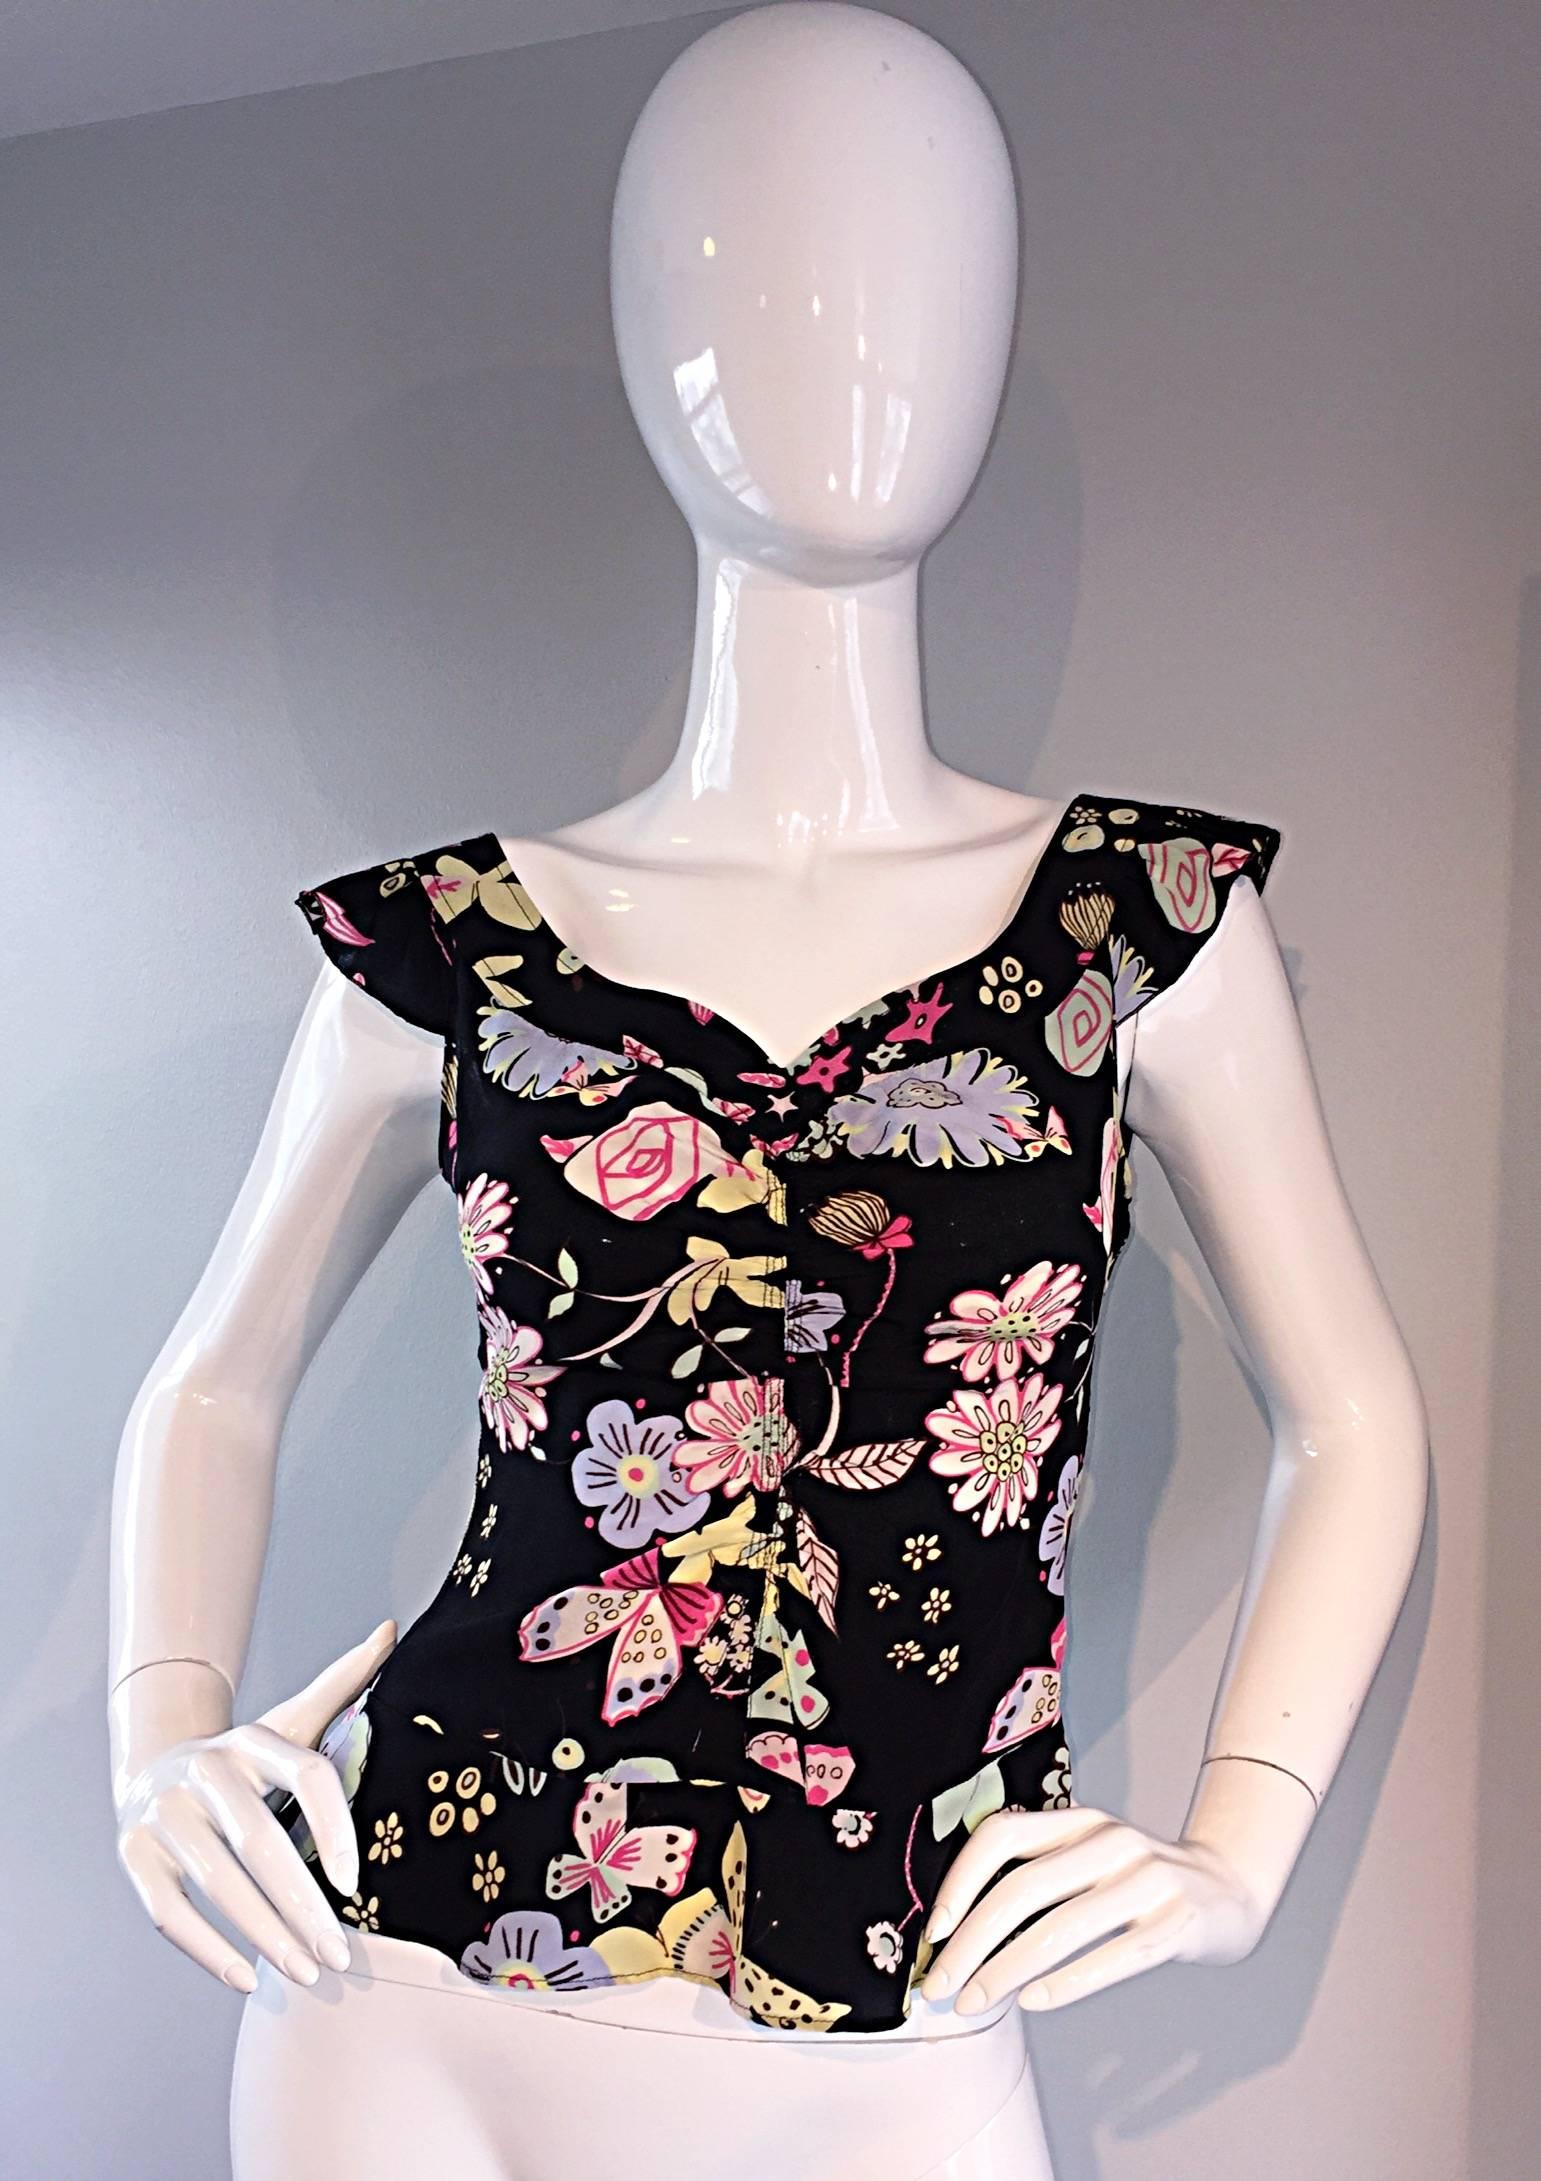 Beautiful early 1990s Moschino Cheap & Chic blouse! Black backdrop, with an array of pastel colored flowers, roses, and butterflies. Feminine fit, that looks great with shorts, jeans, trousers, or a skirt. Sweetheart neckline. In great condition.